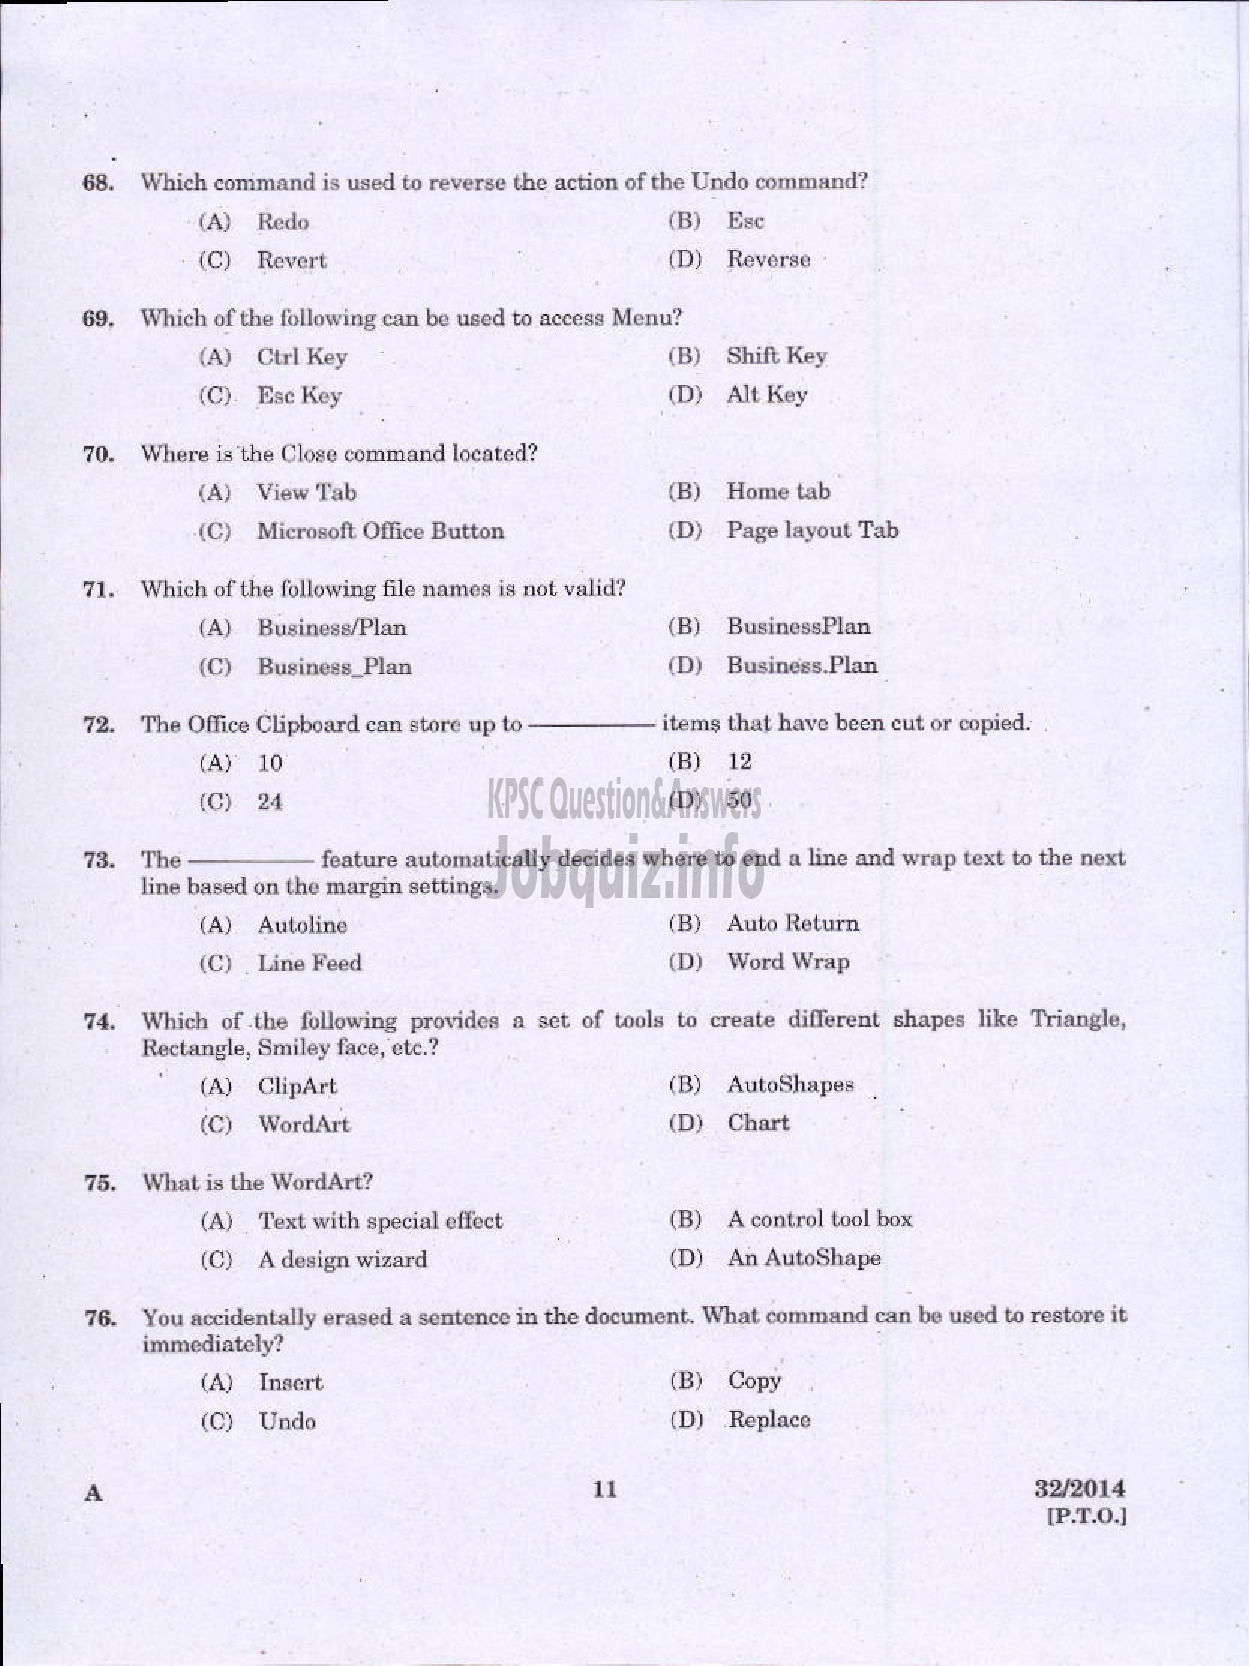 Kerala PSC Question Paper - LOWER DIVISION TYPIST NCA VARIOUS GOVERNMENT OWNED COMPANIES IDKY-9